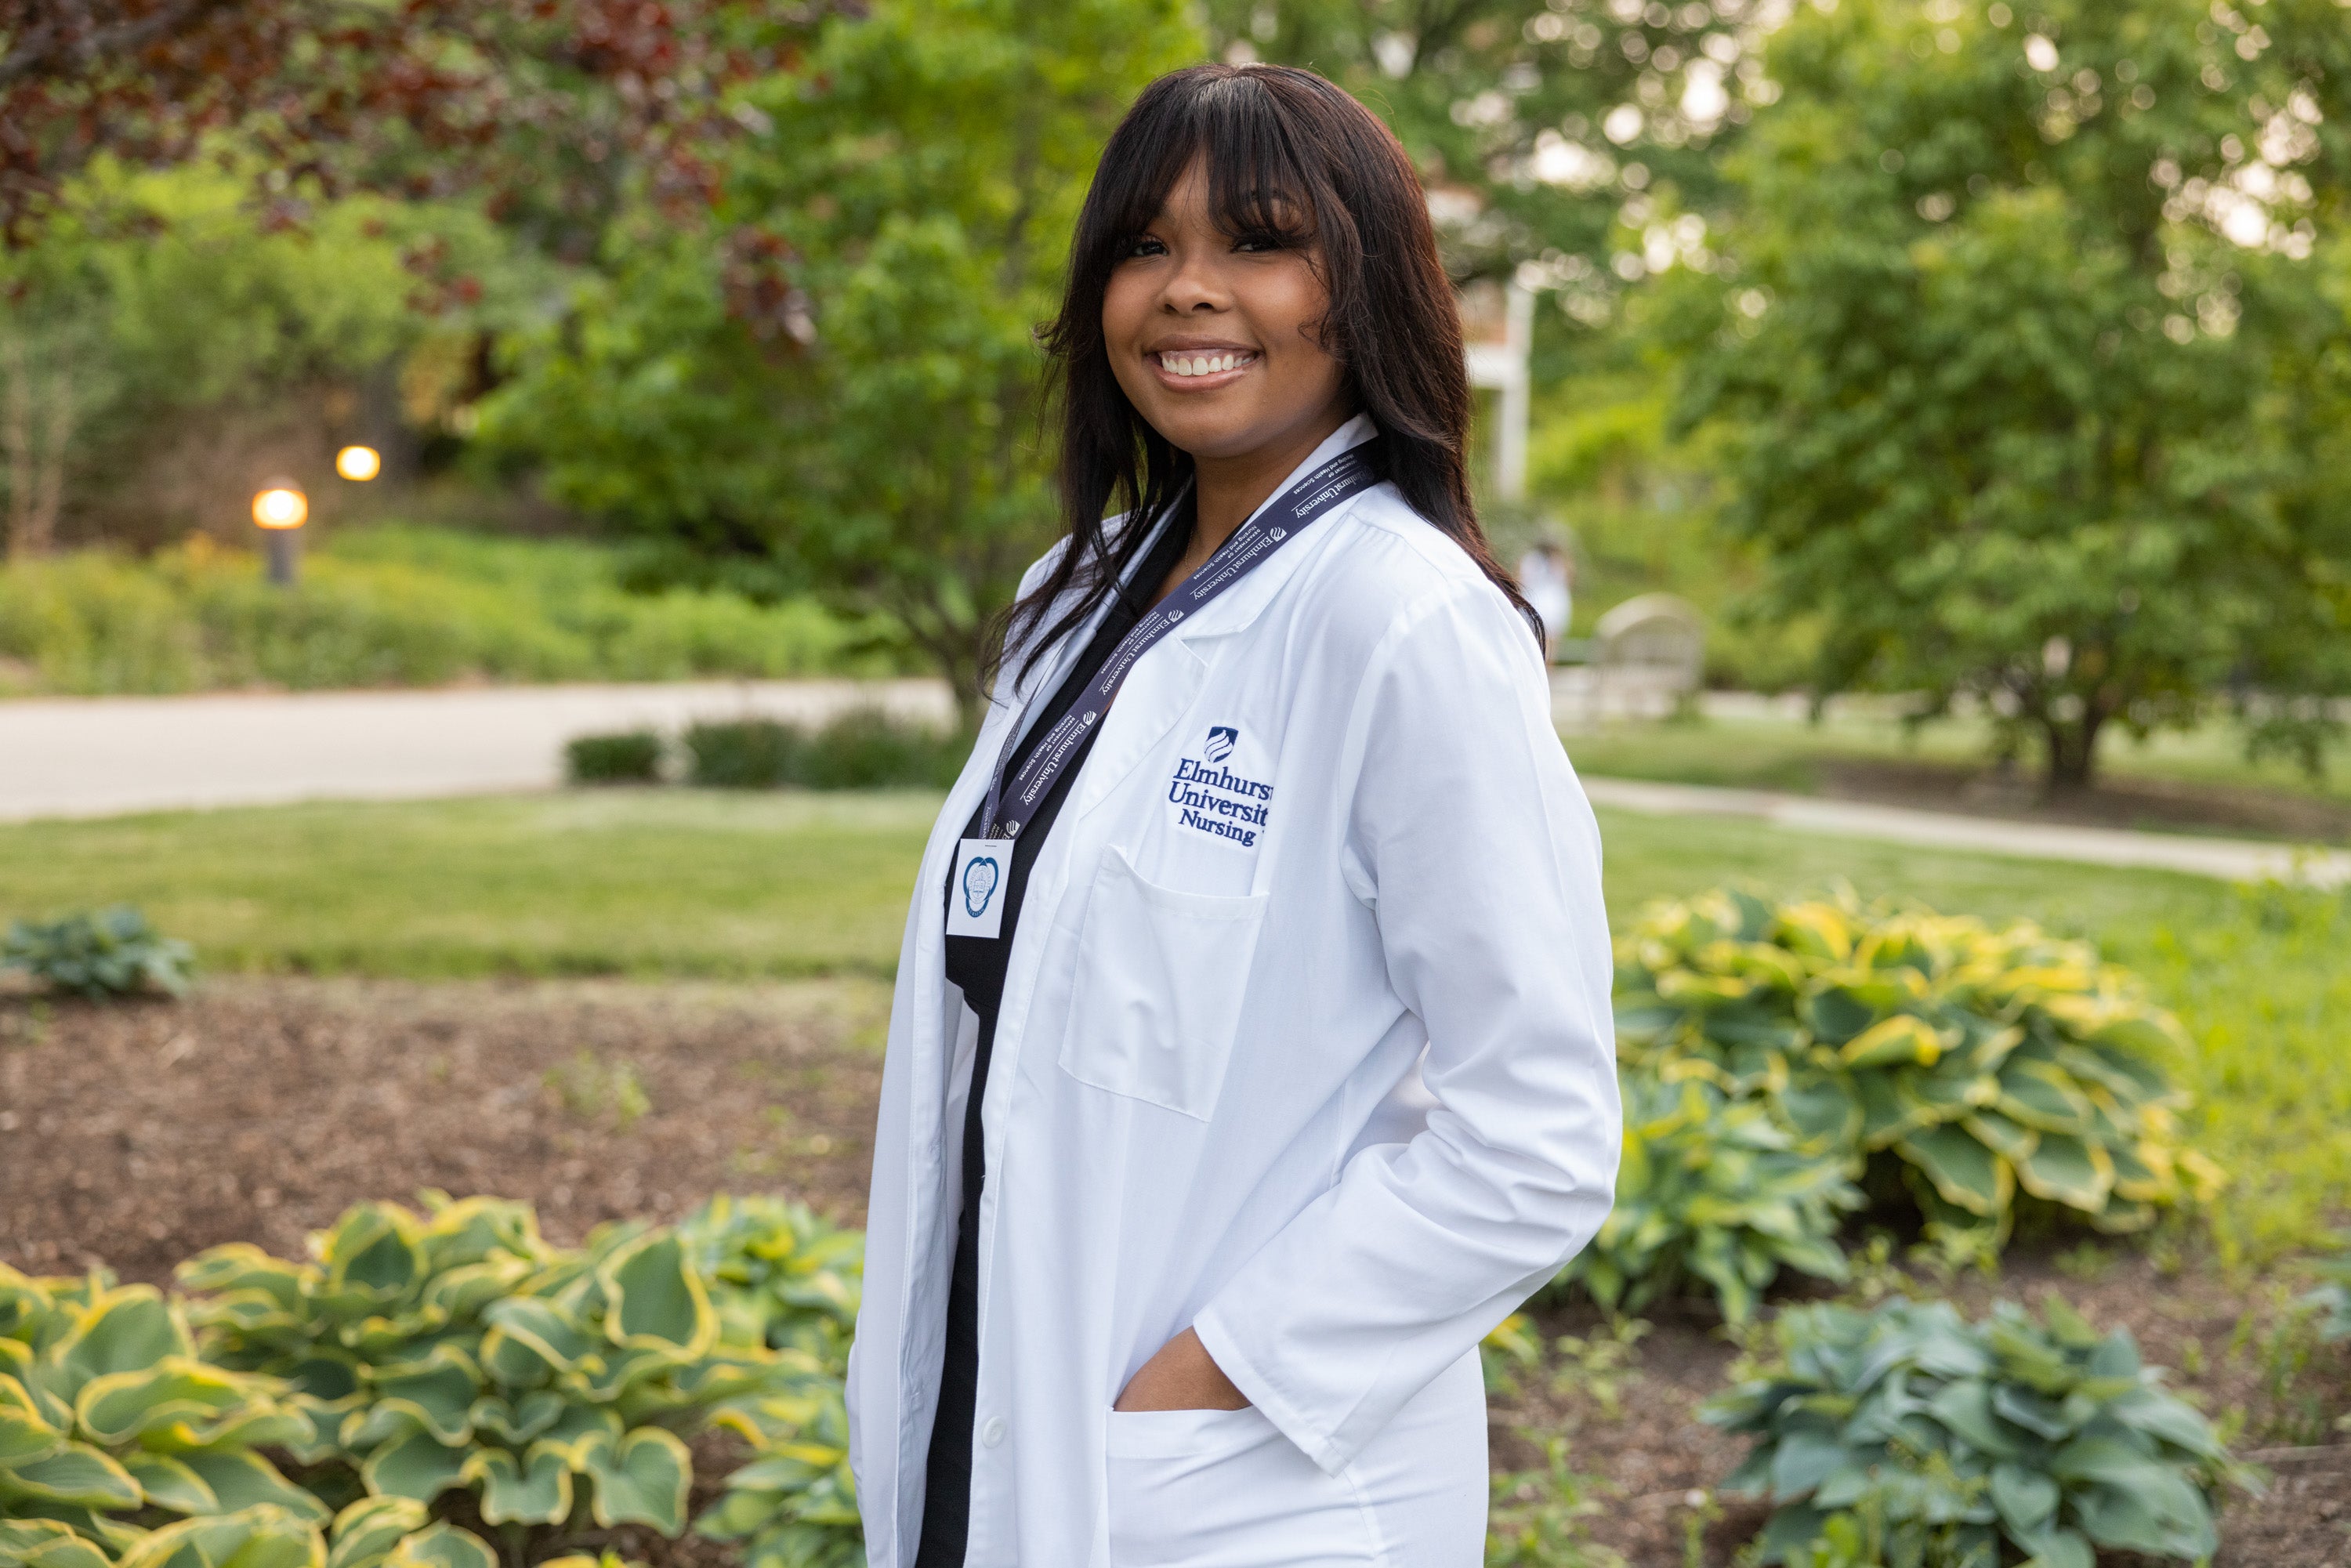 What Are Prerequisites for Nursing? Your Path to Success at Elmhurst  University